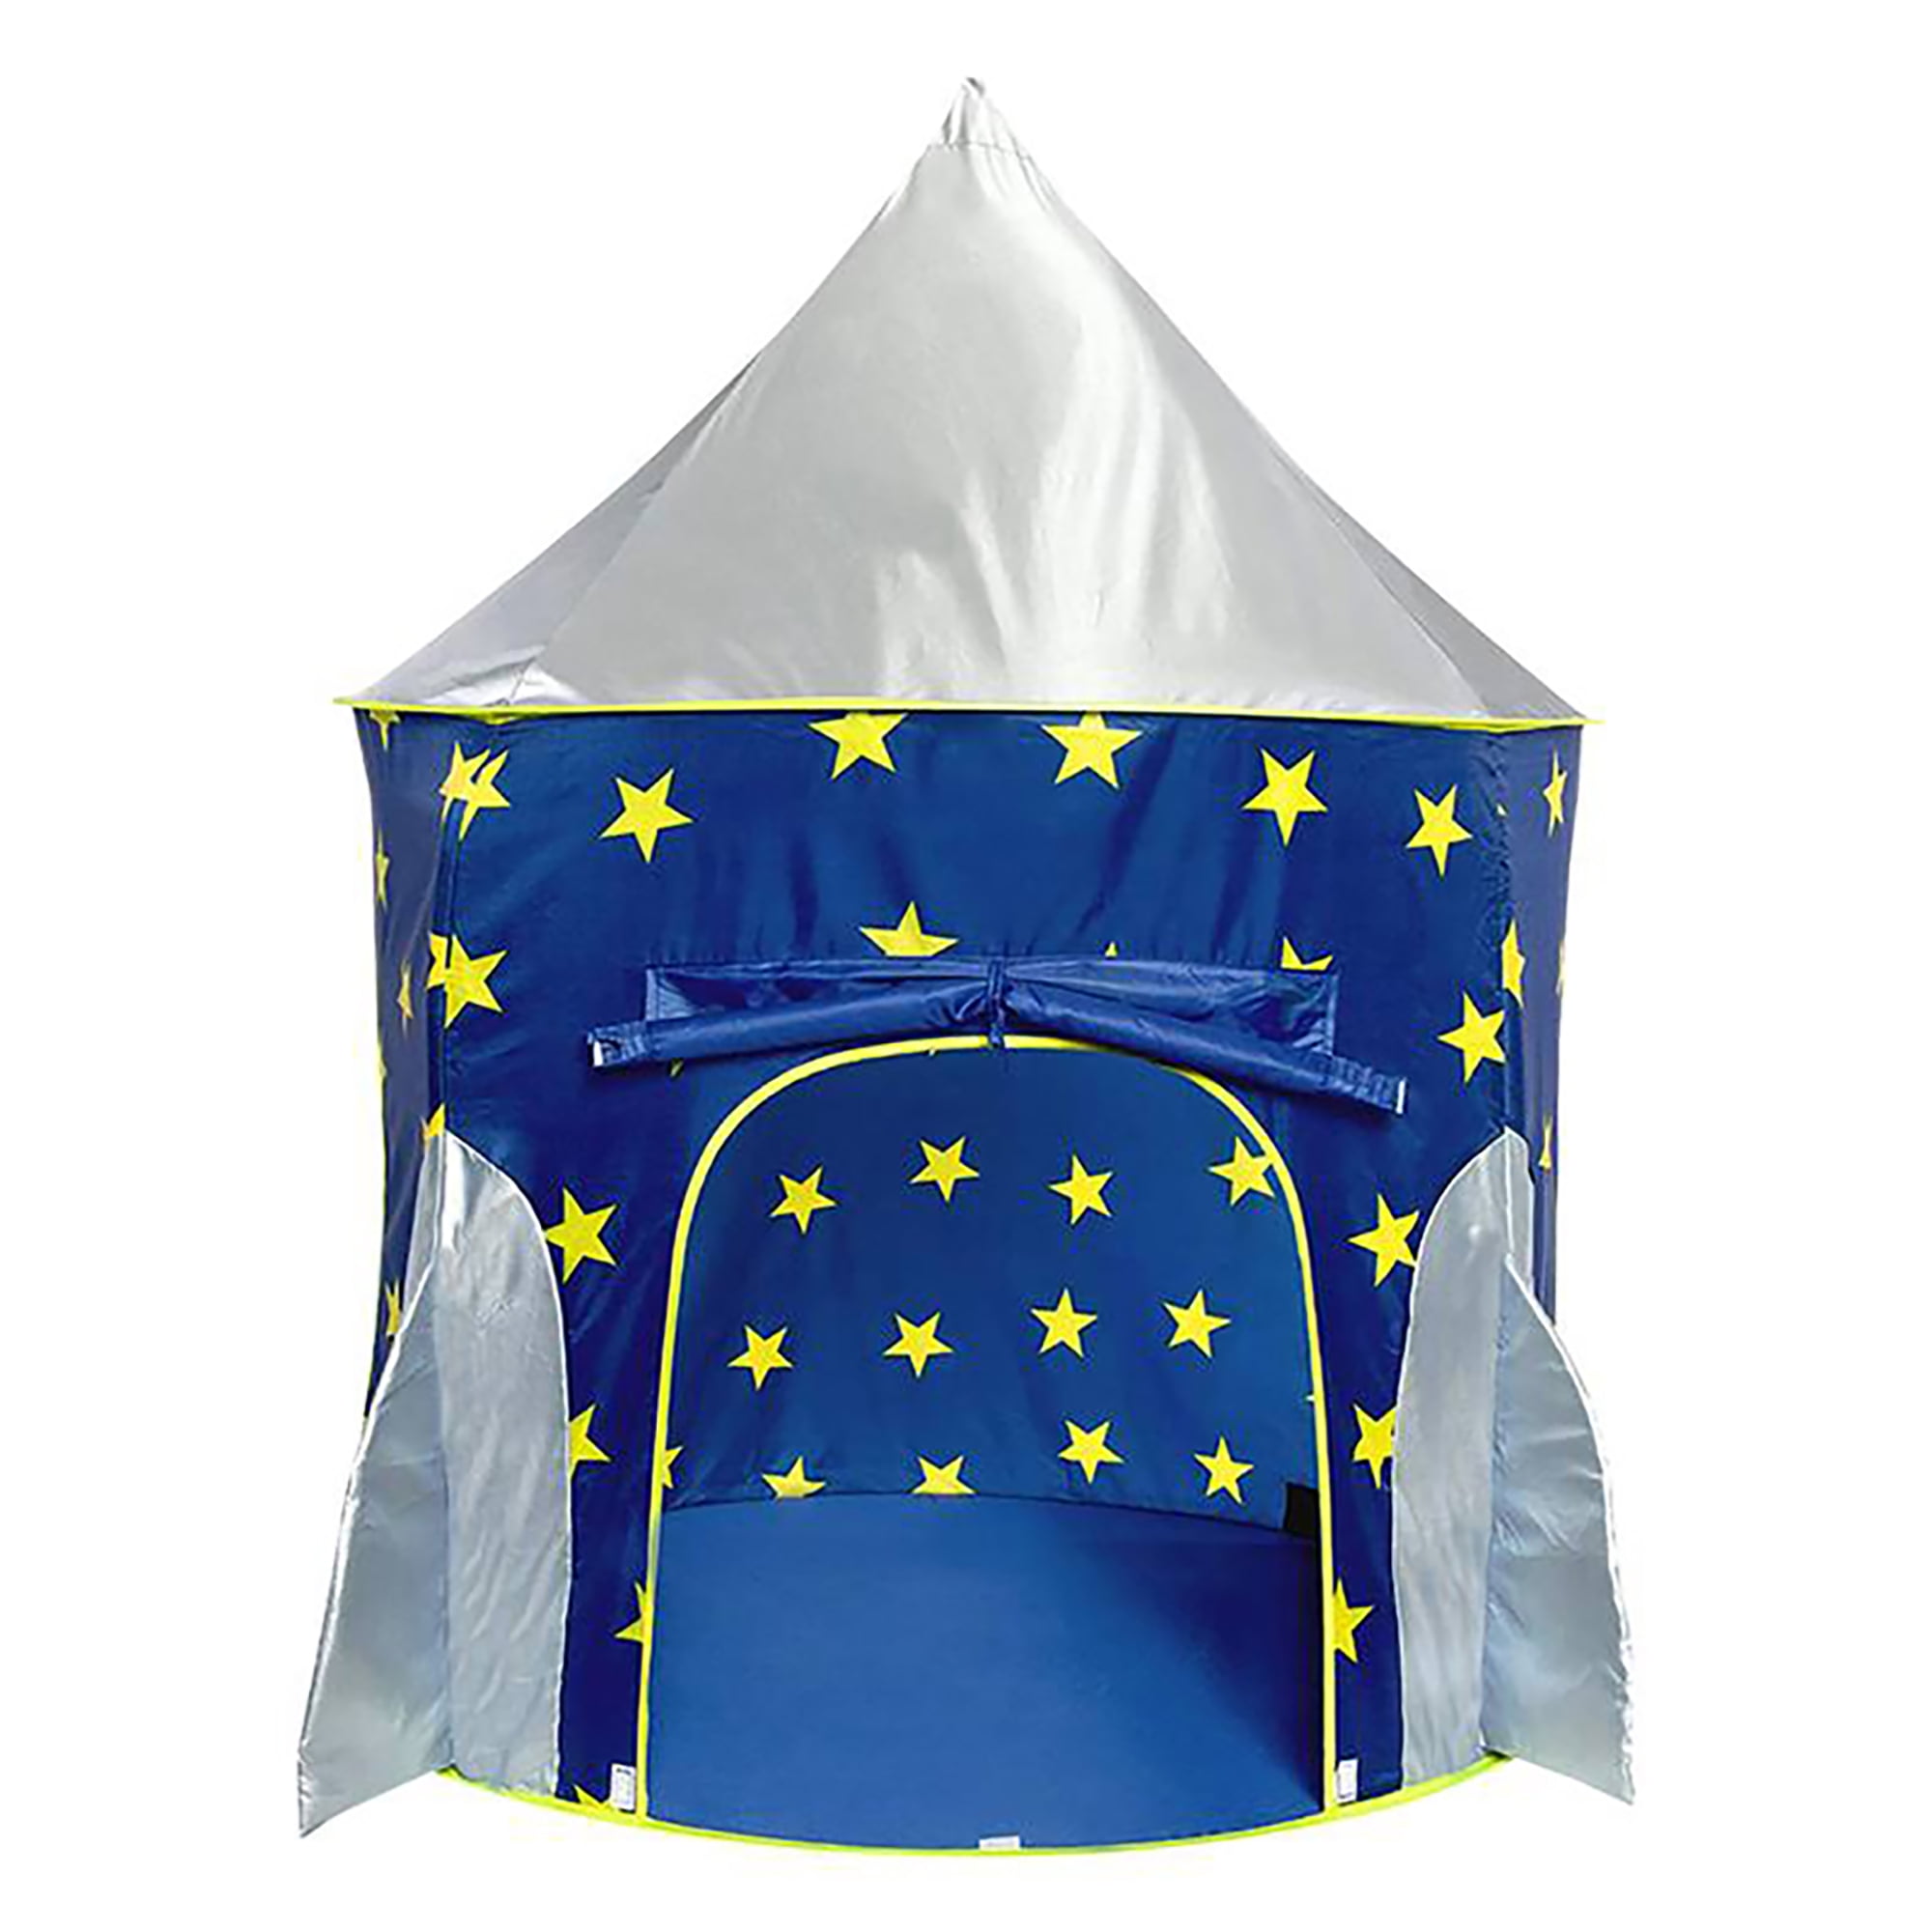 Rocket Space Ship Play Tent Planets Glowing Stars Ventilated Folding Playhouse 